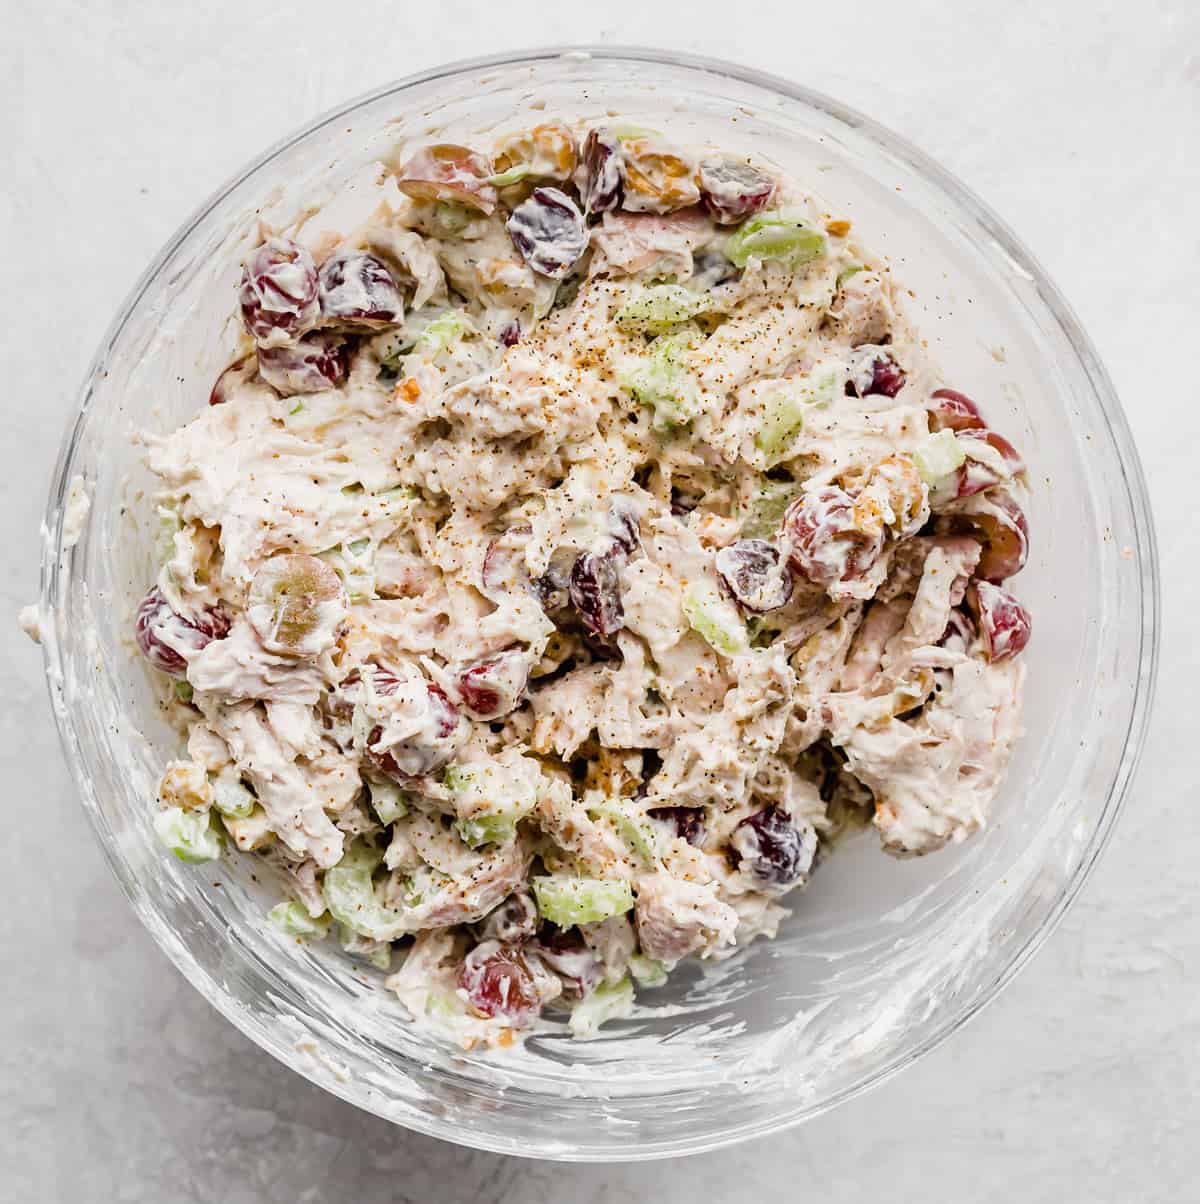 Chicken Salad filling in a glass bowl on a light gray background.